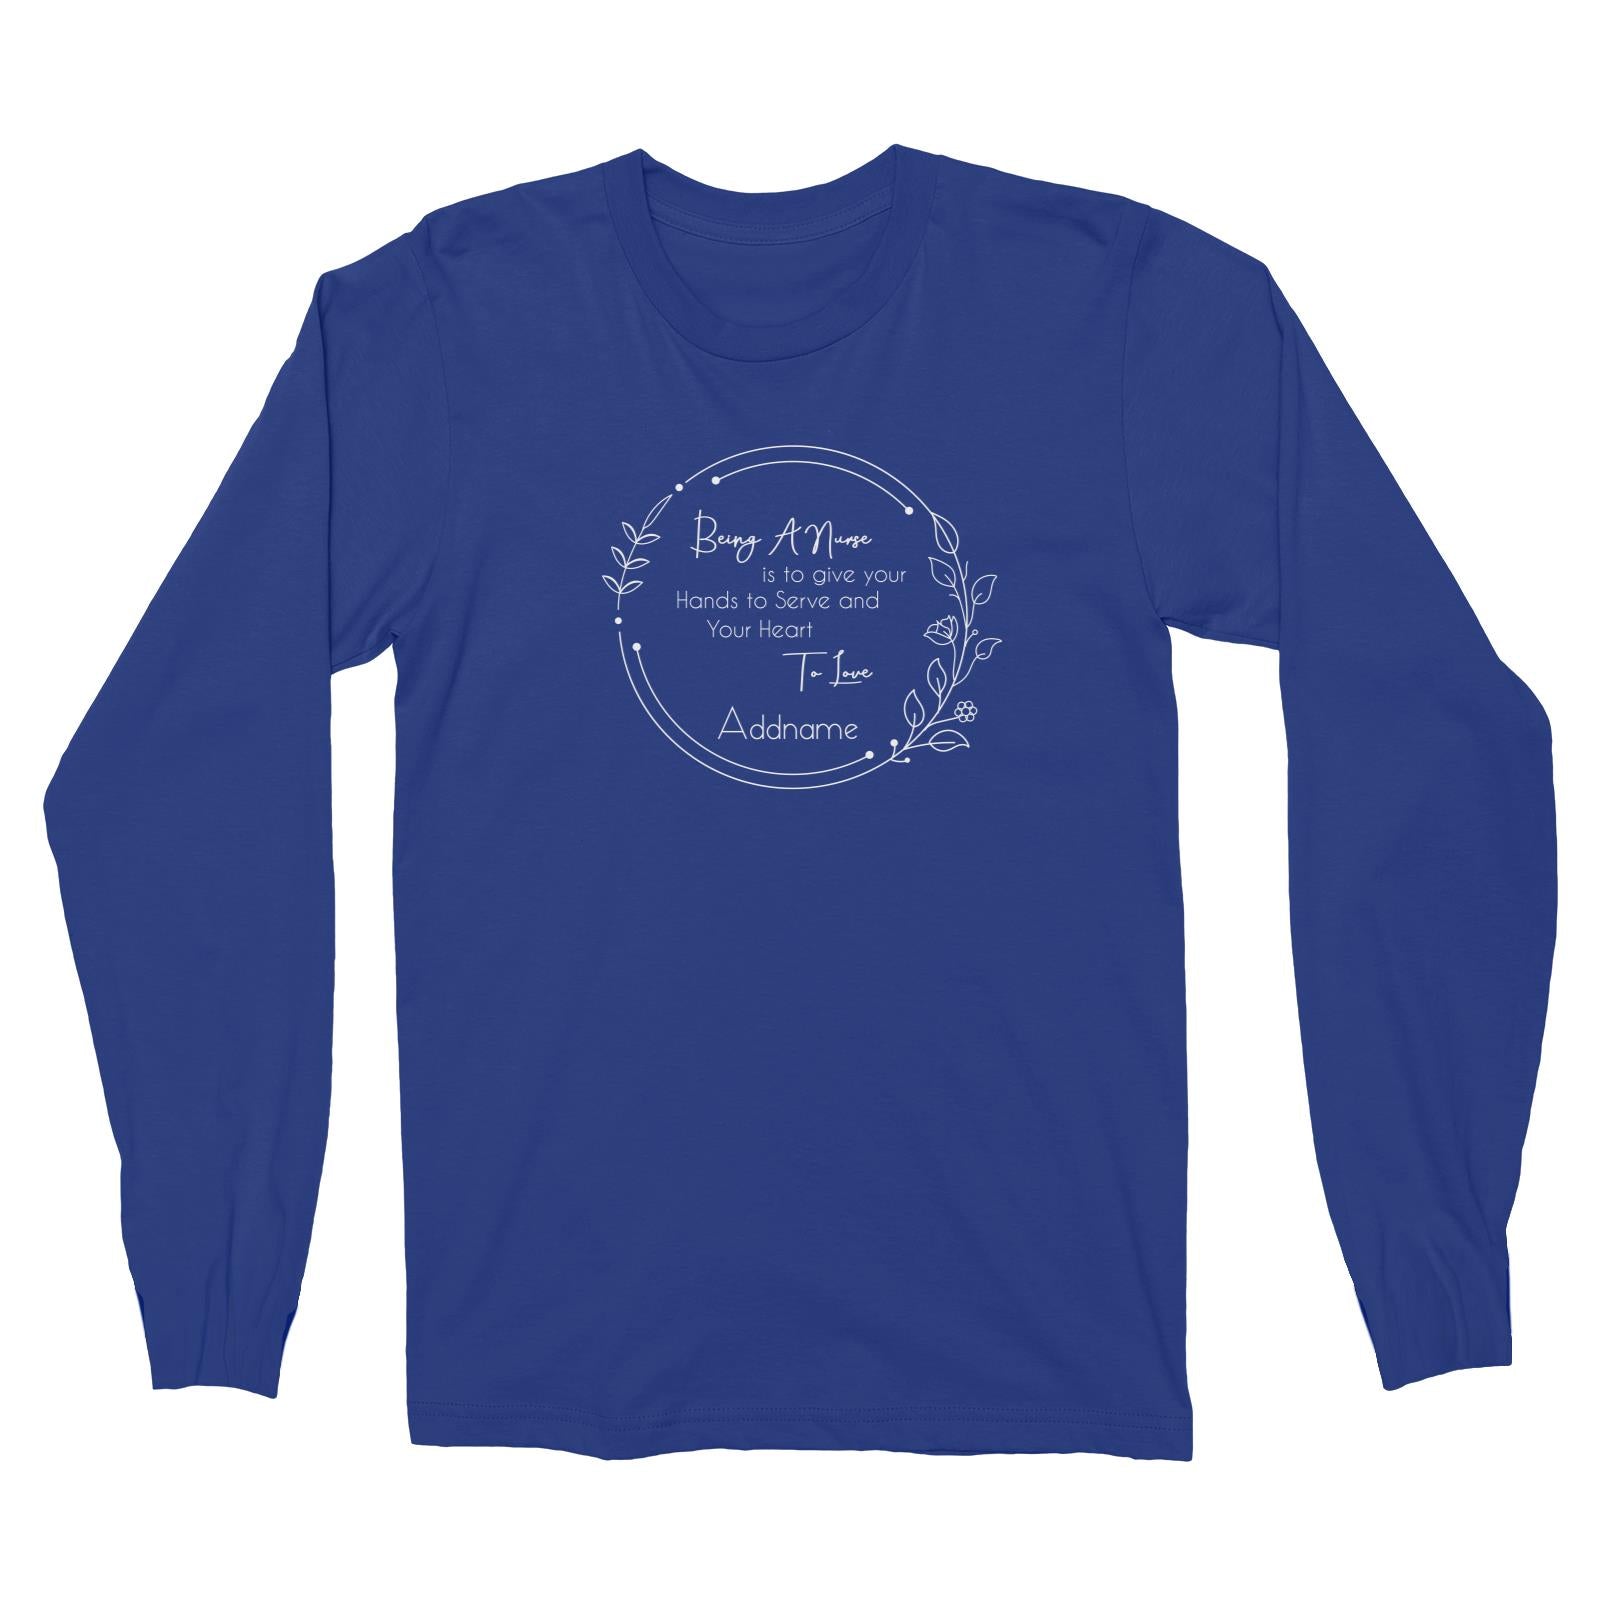 Being A Nurse is to give your Hands to Serve and Your Heart To Love Long Sleeve Unisex T-Shirt